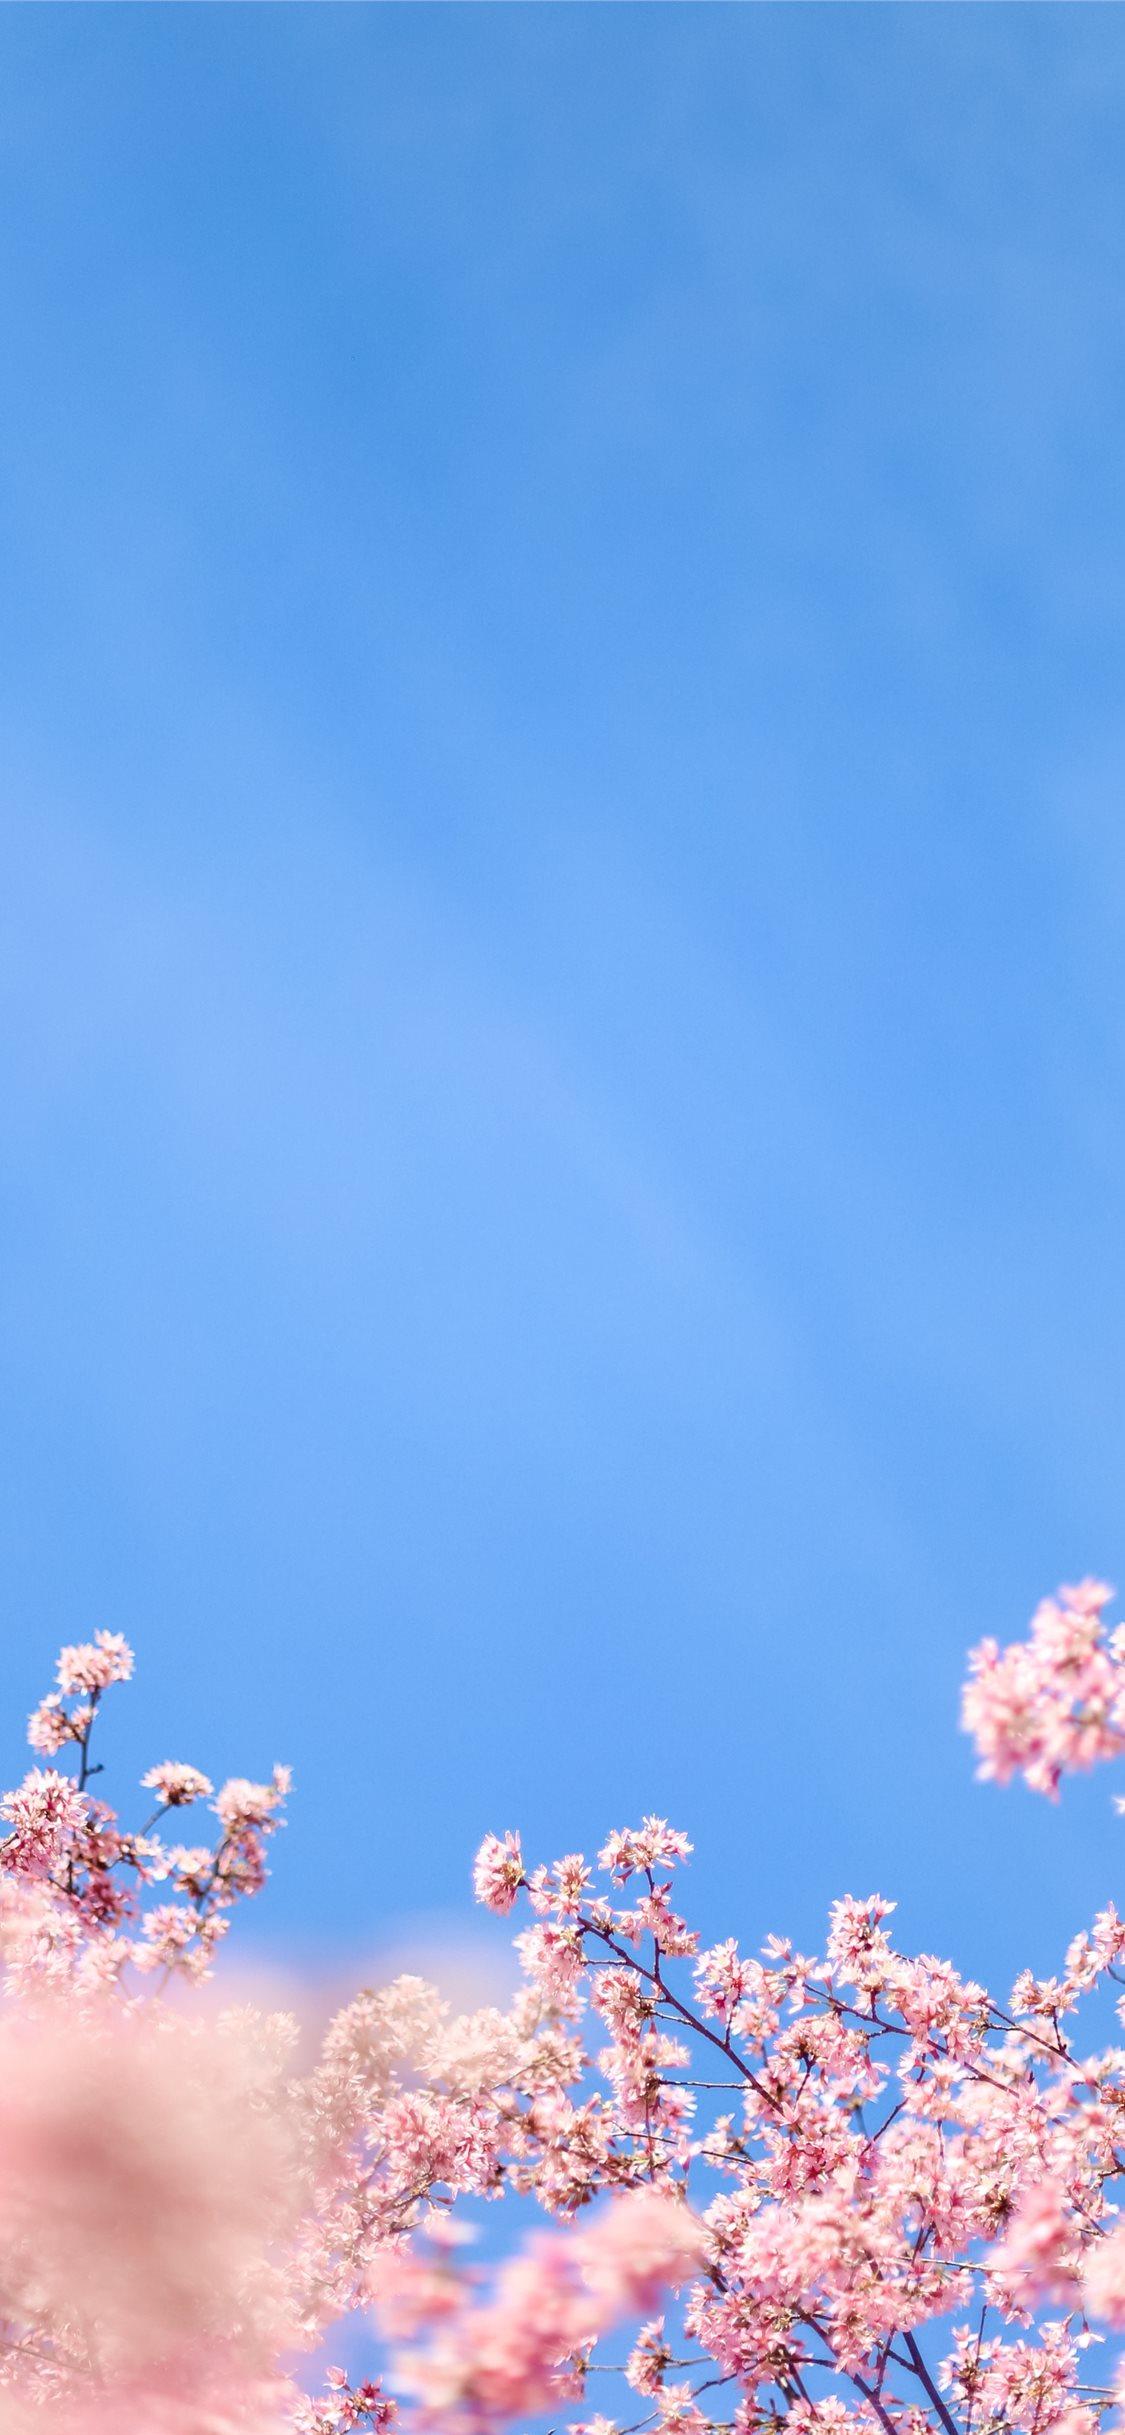 White Cherry Blossom Under Blue Sky During Daytime iPhone X